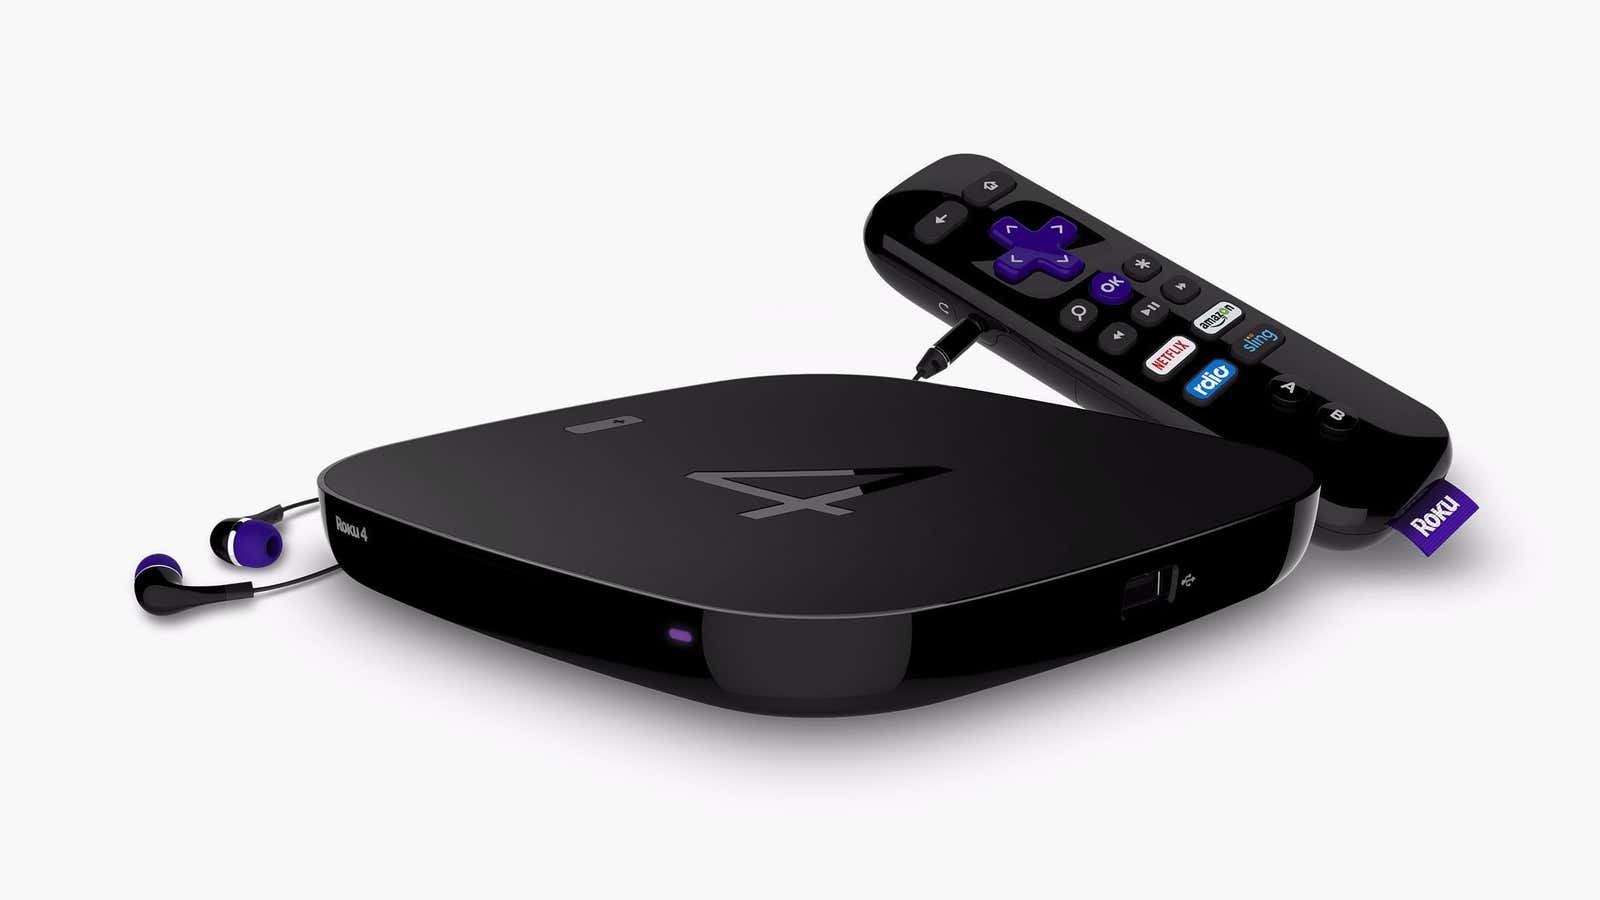 That’s good news for Roku’s potential IPO.